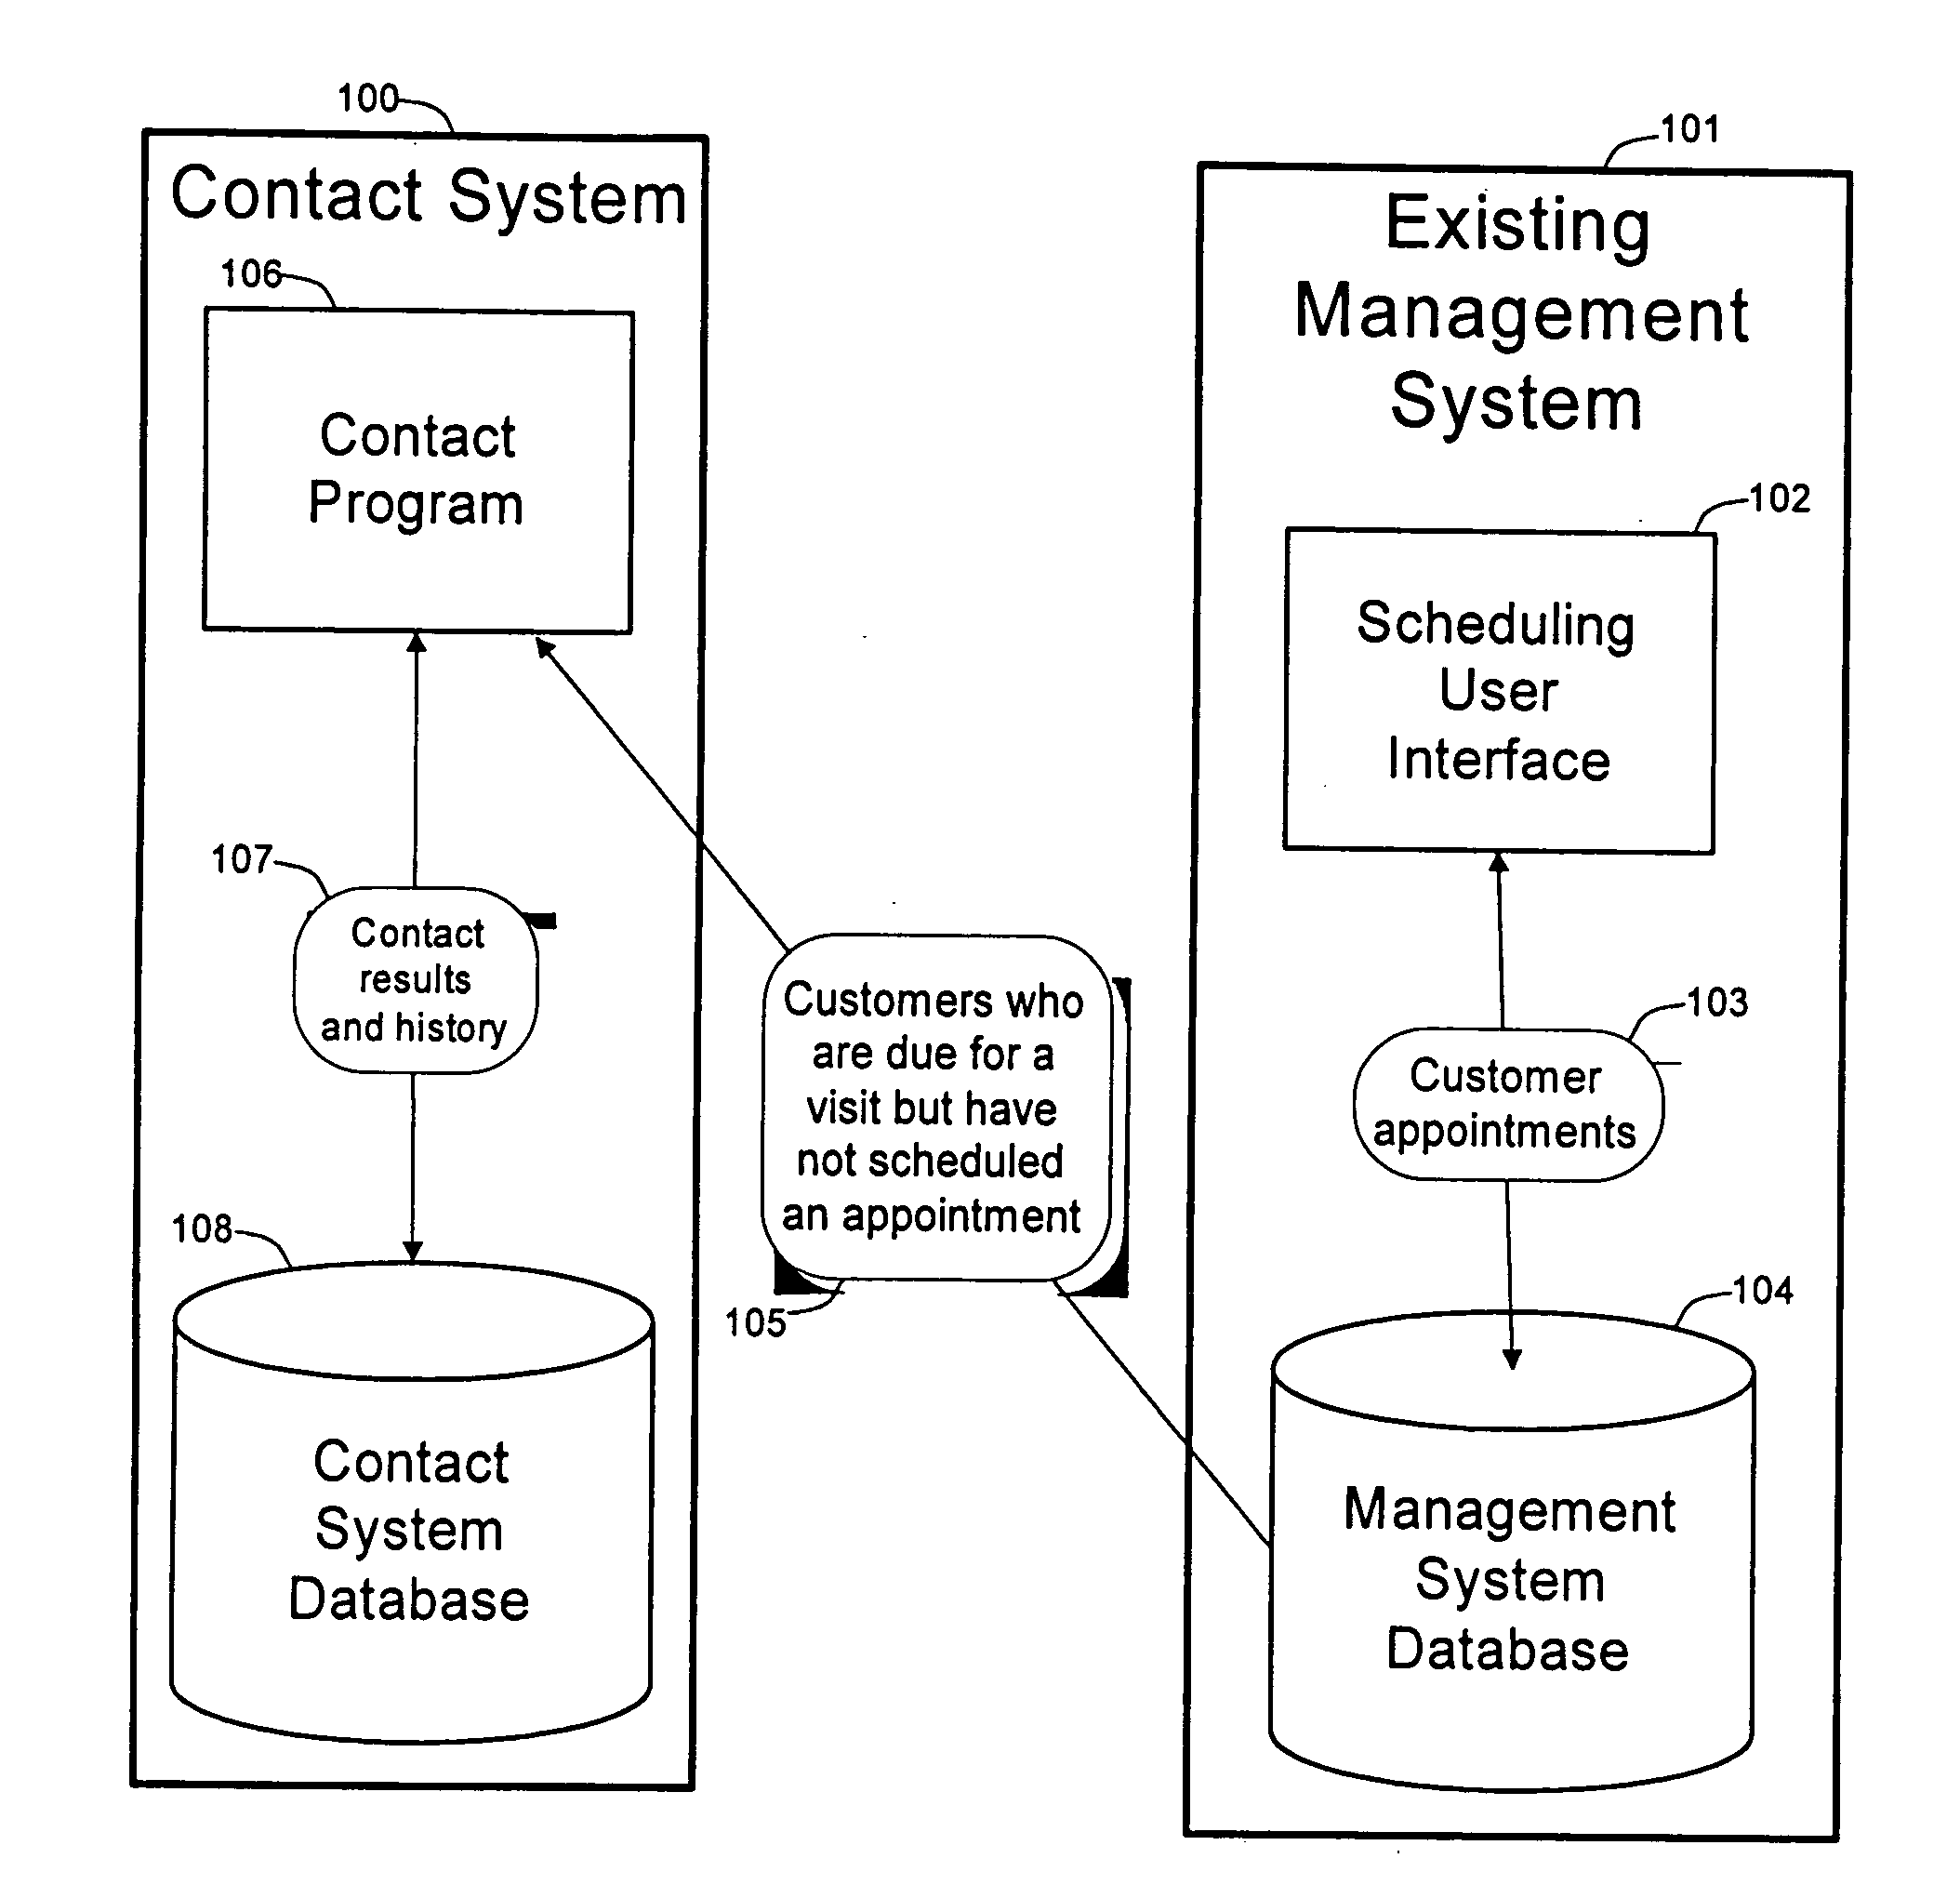 Method and apparatus for identifying and contacting customers who are due for a visit but have not scheduled an appointment